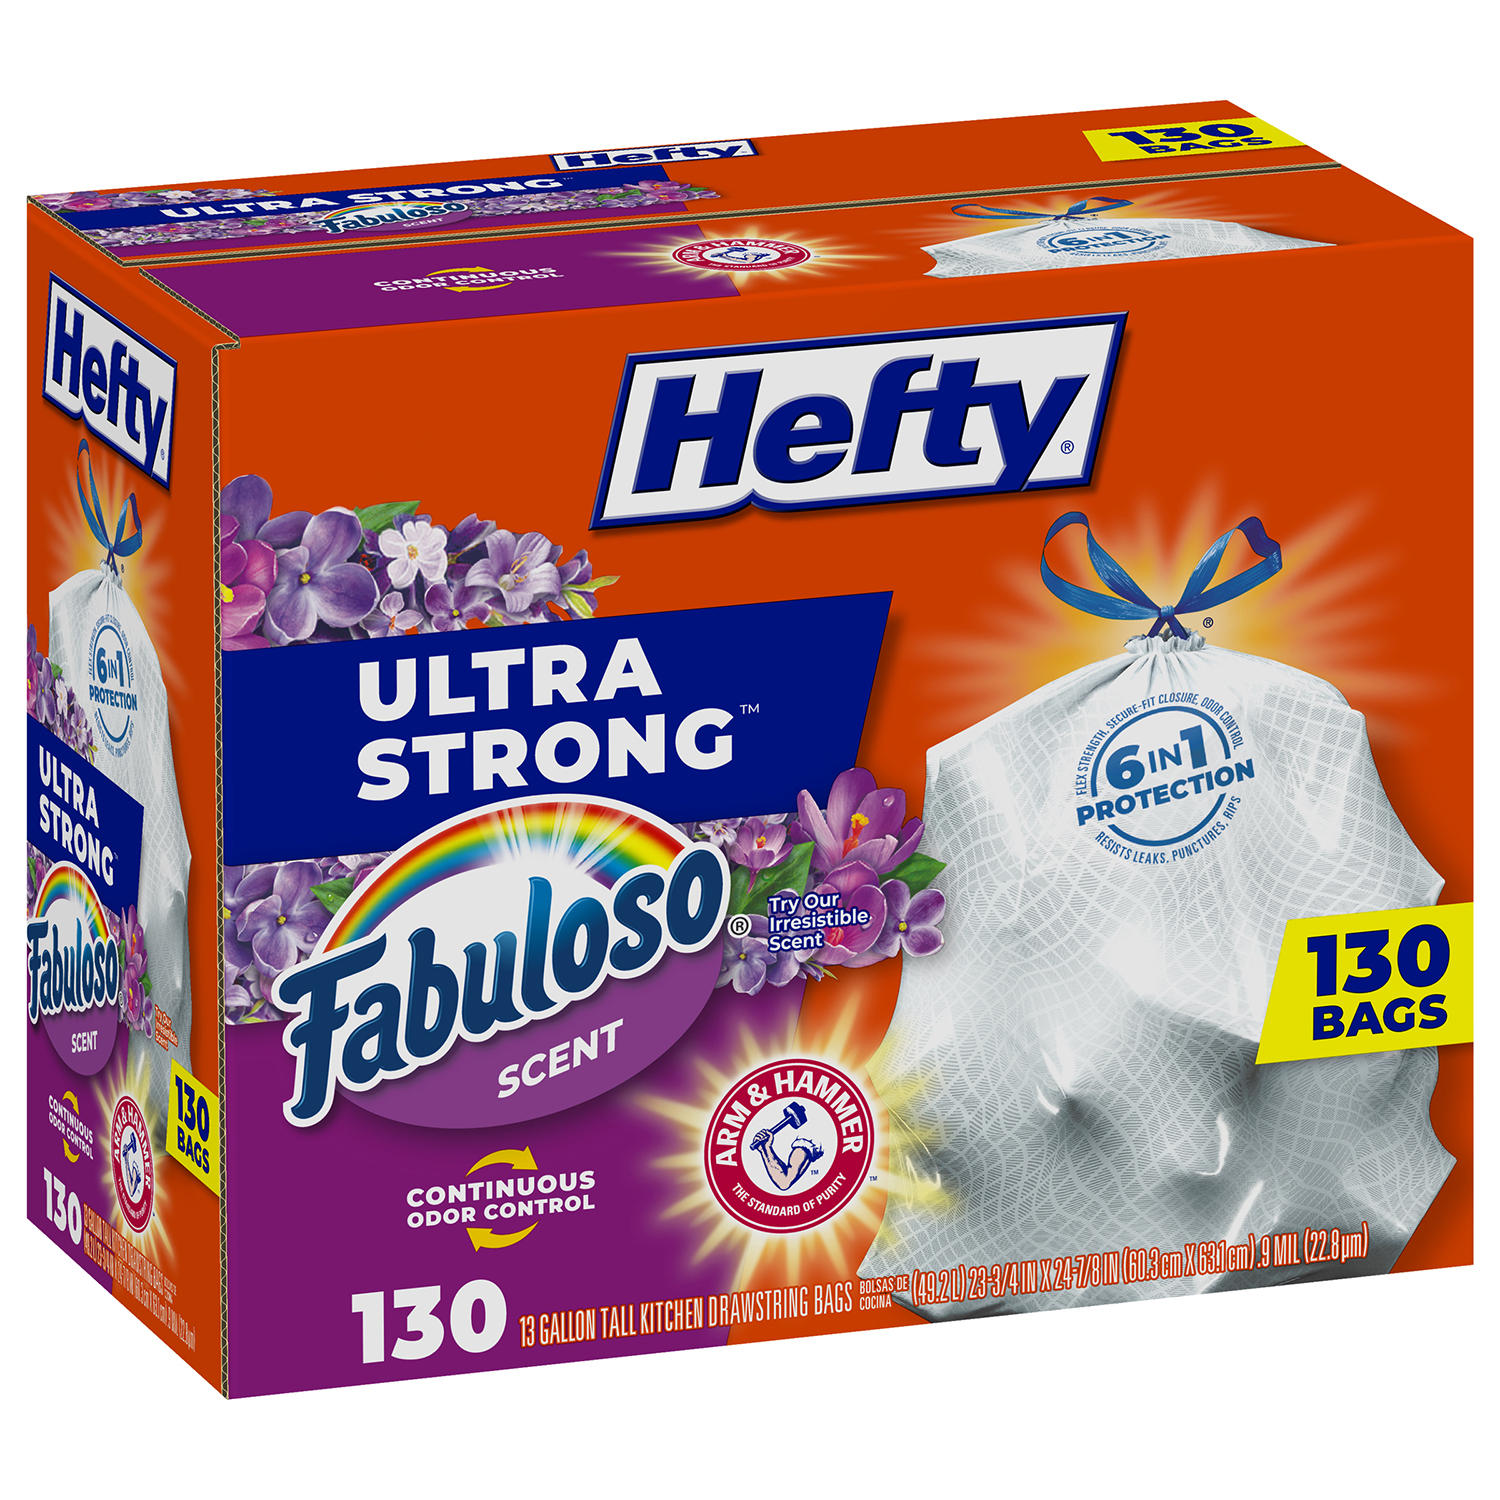 Hefty Ultra Strong Kitchen Drawstring Trash Bags, Fabuloso Scent (13 gal, 130 ct.)